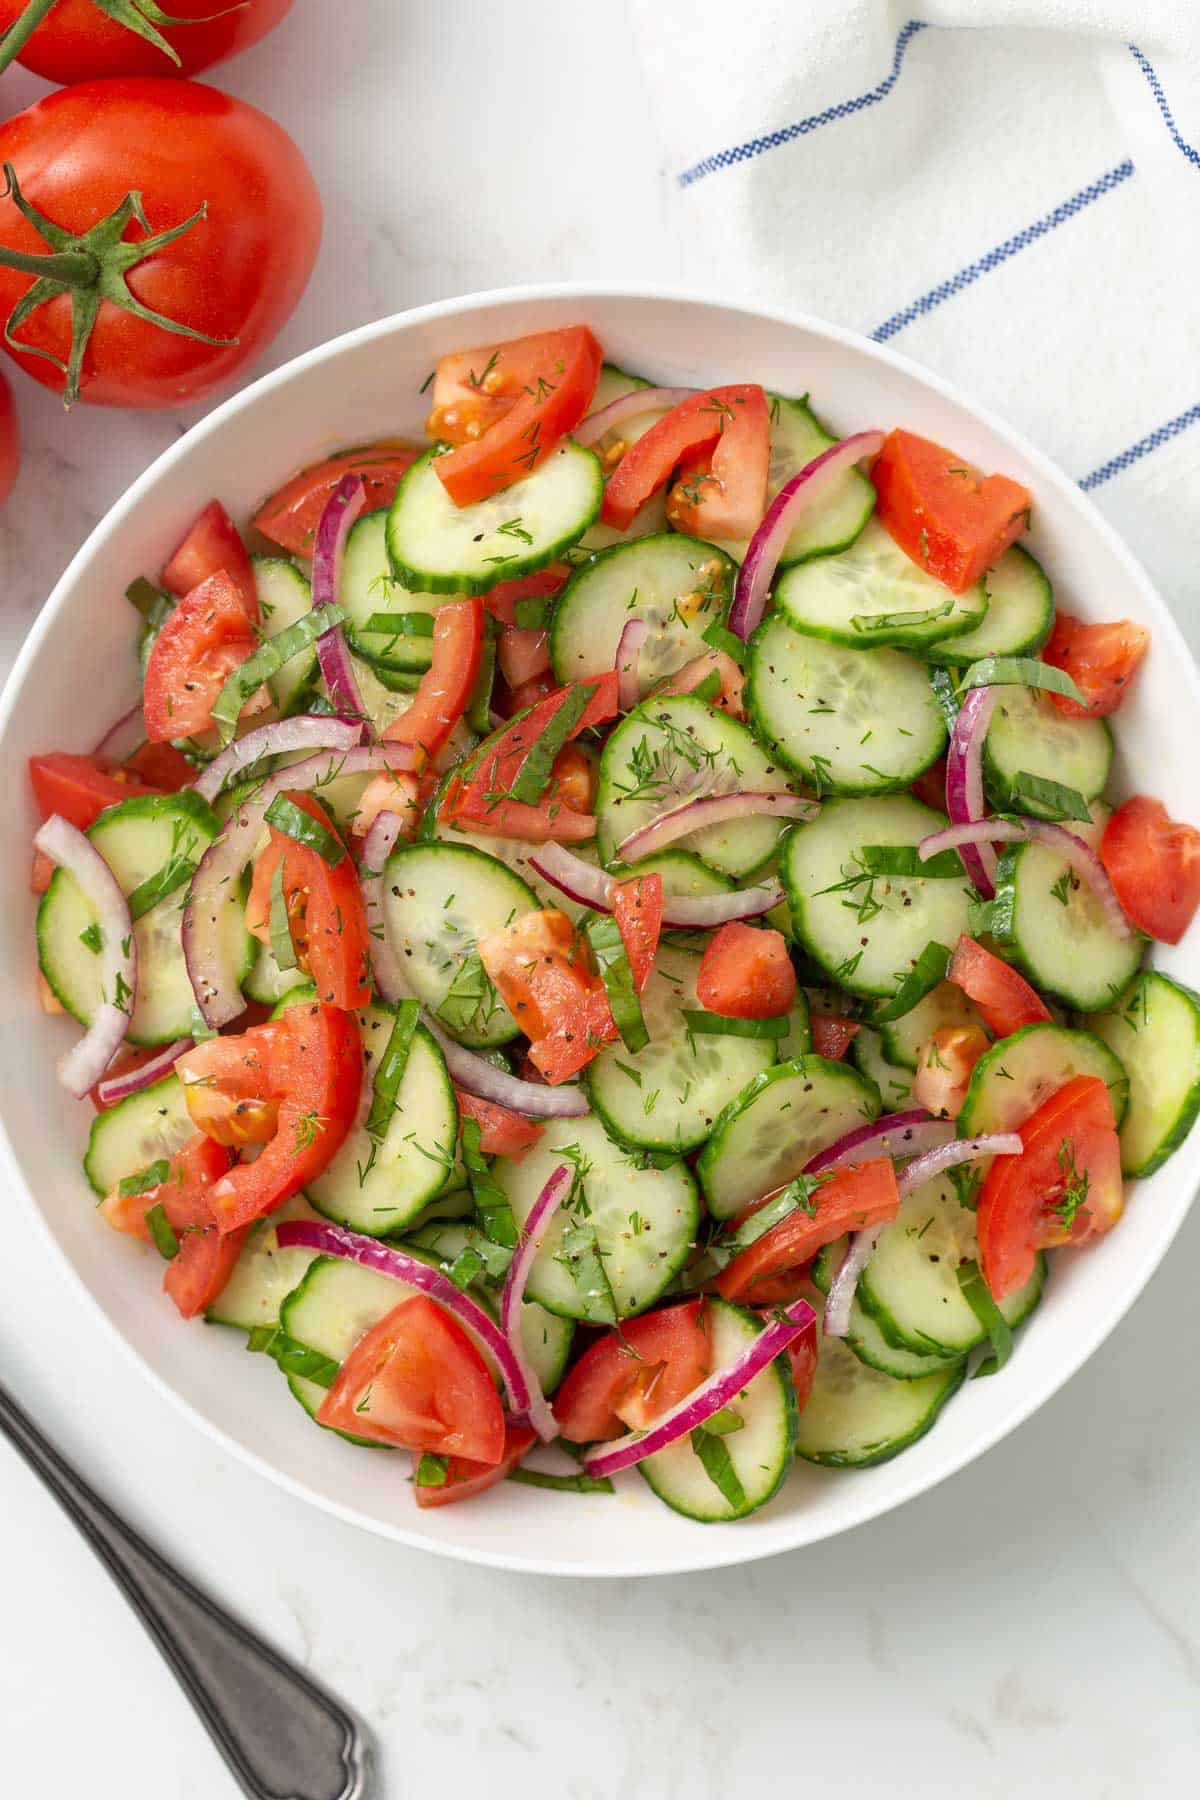 Overhead view of cucumber tomato salad in a white bowl by a blue striped kitchen towel.